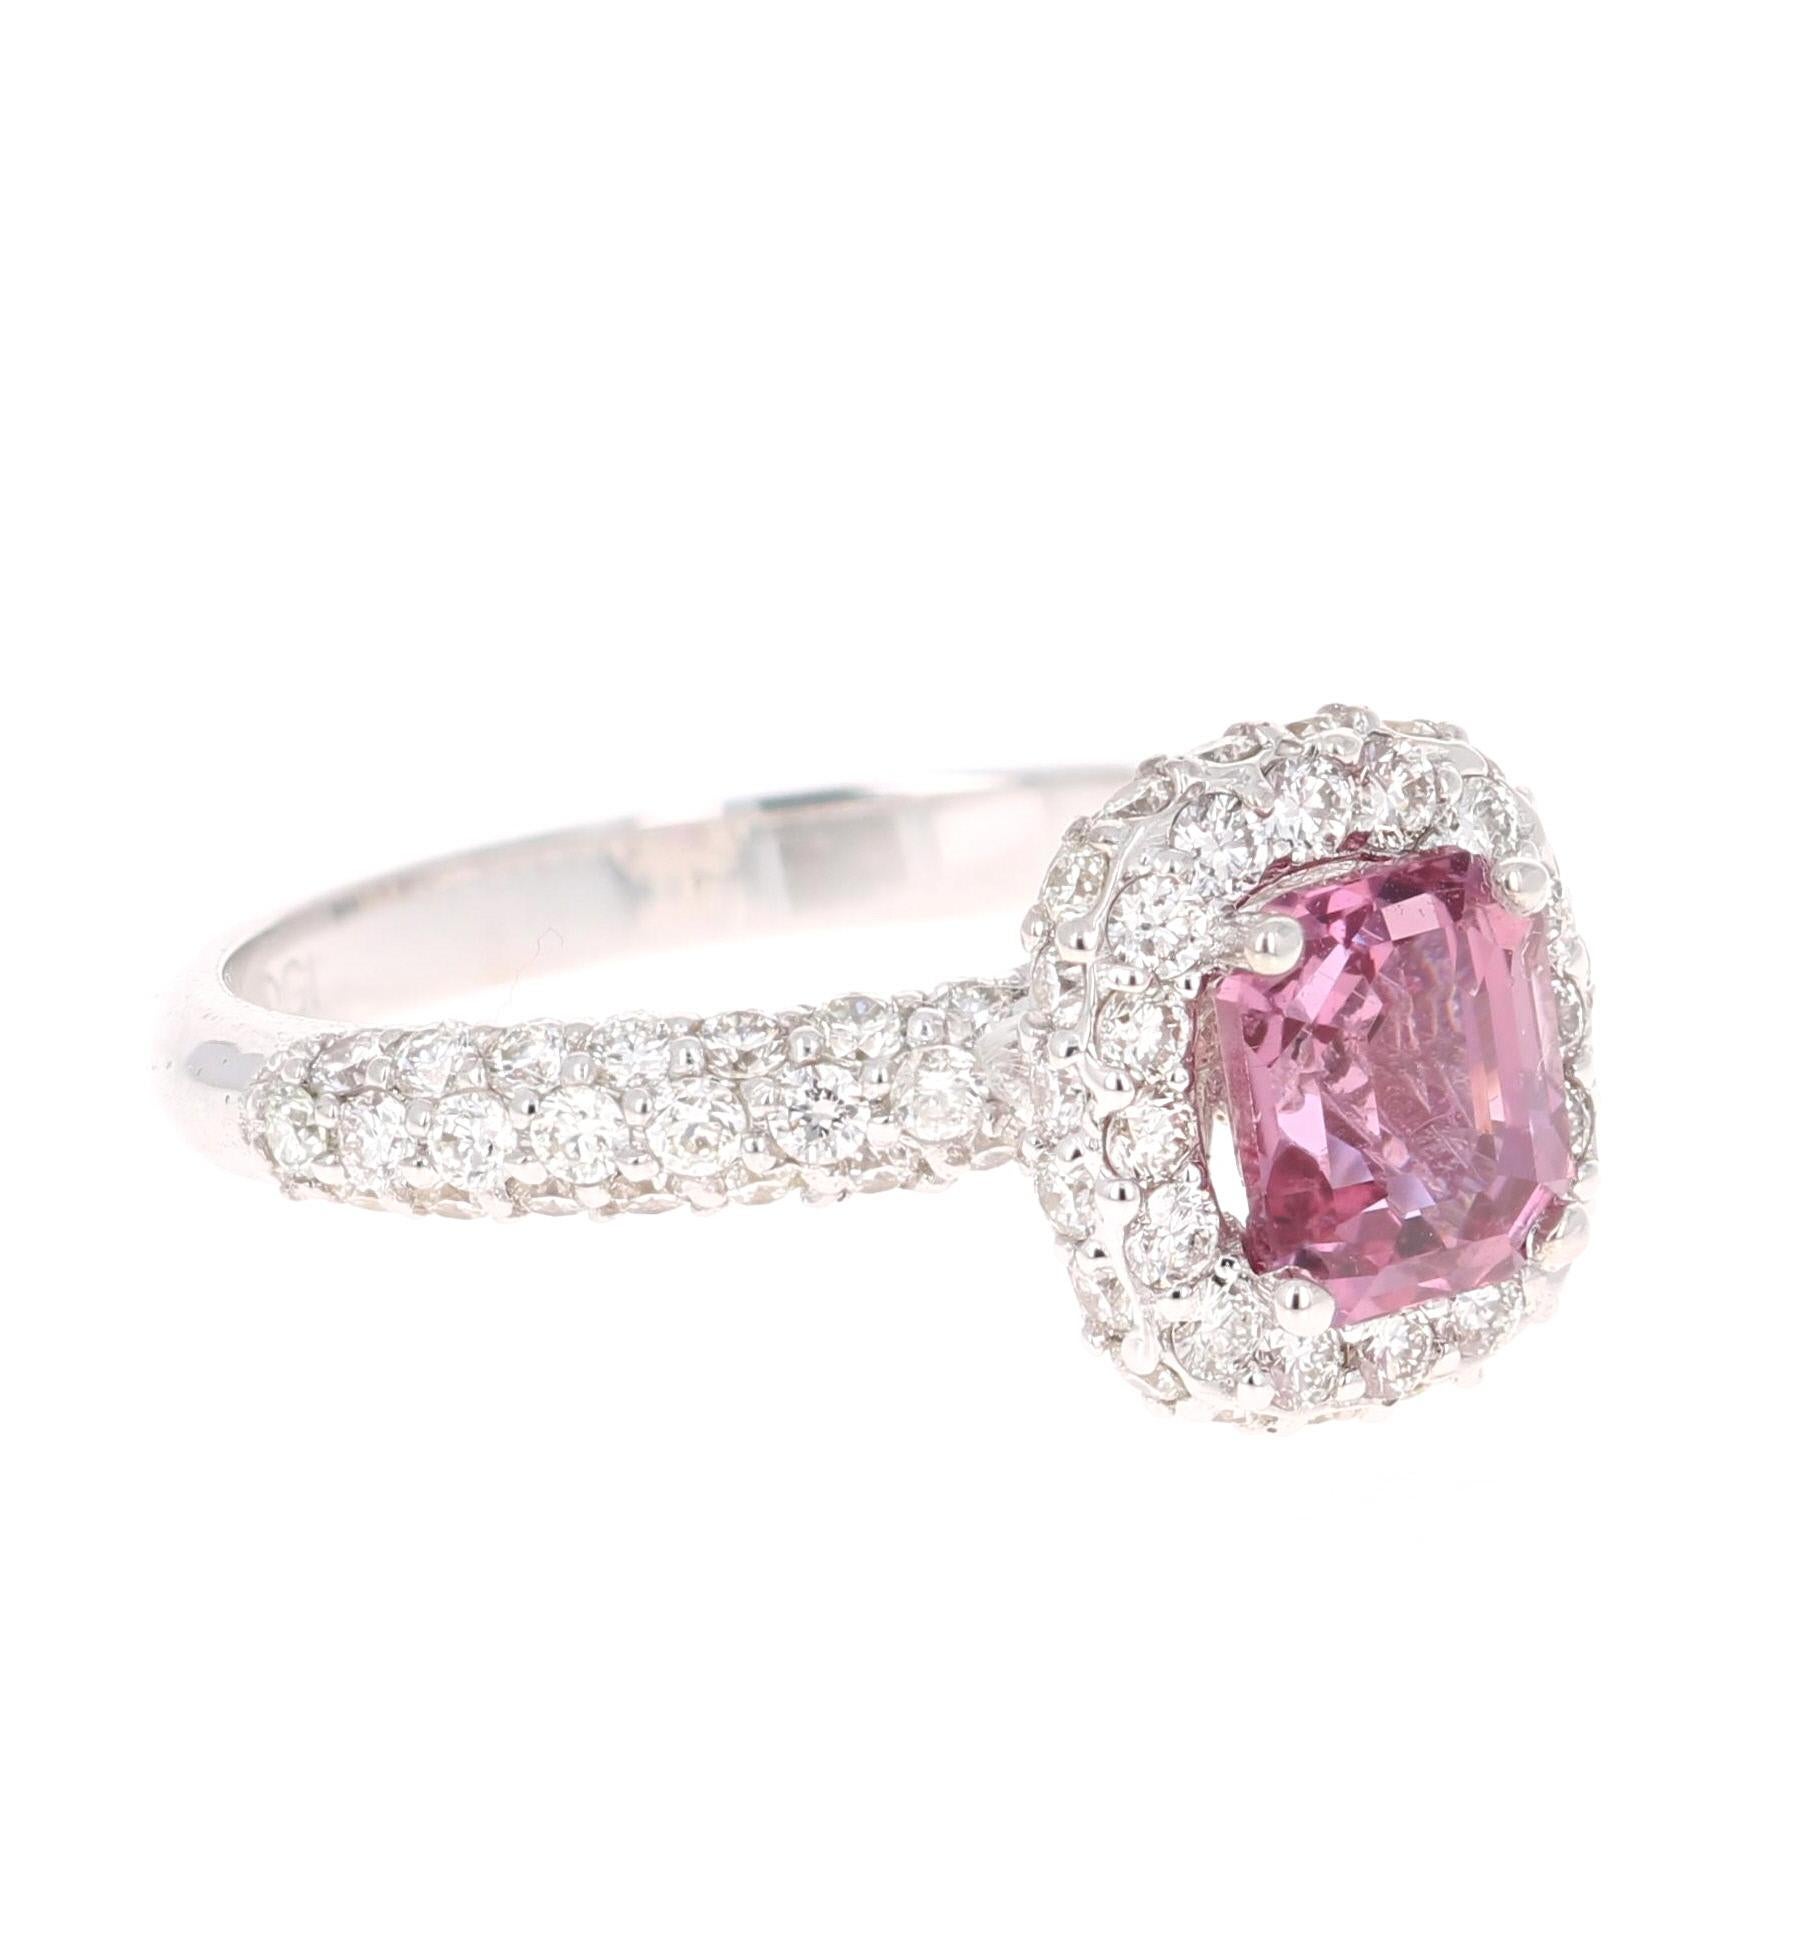 This beautiful ring has a Natural Emerald Cut Pink Sapphire that weights 1.47 Carats. The Pink Sapphire has been certified by GIA, Certificate #: 2191204352

The ring is embellished with Round Cut Diamonds that weigh 0.97 Carats with a clarity and